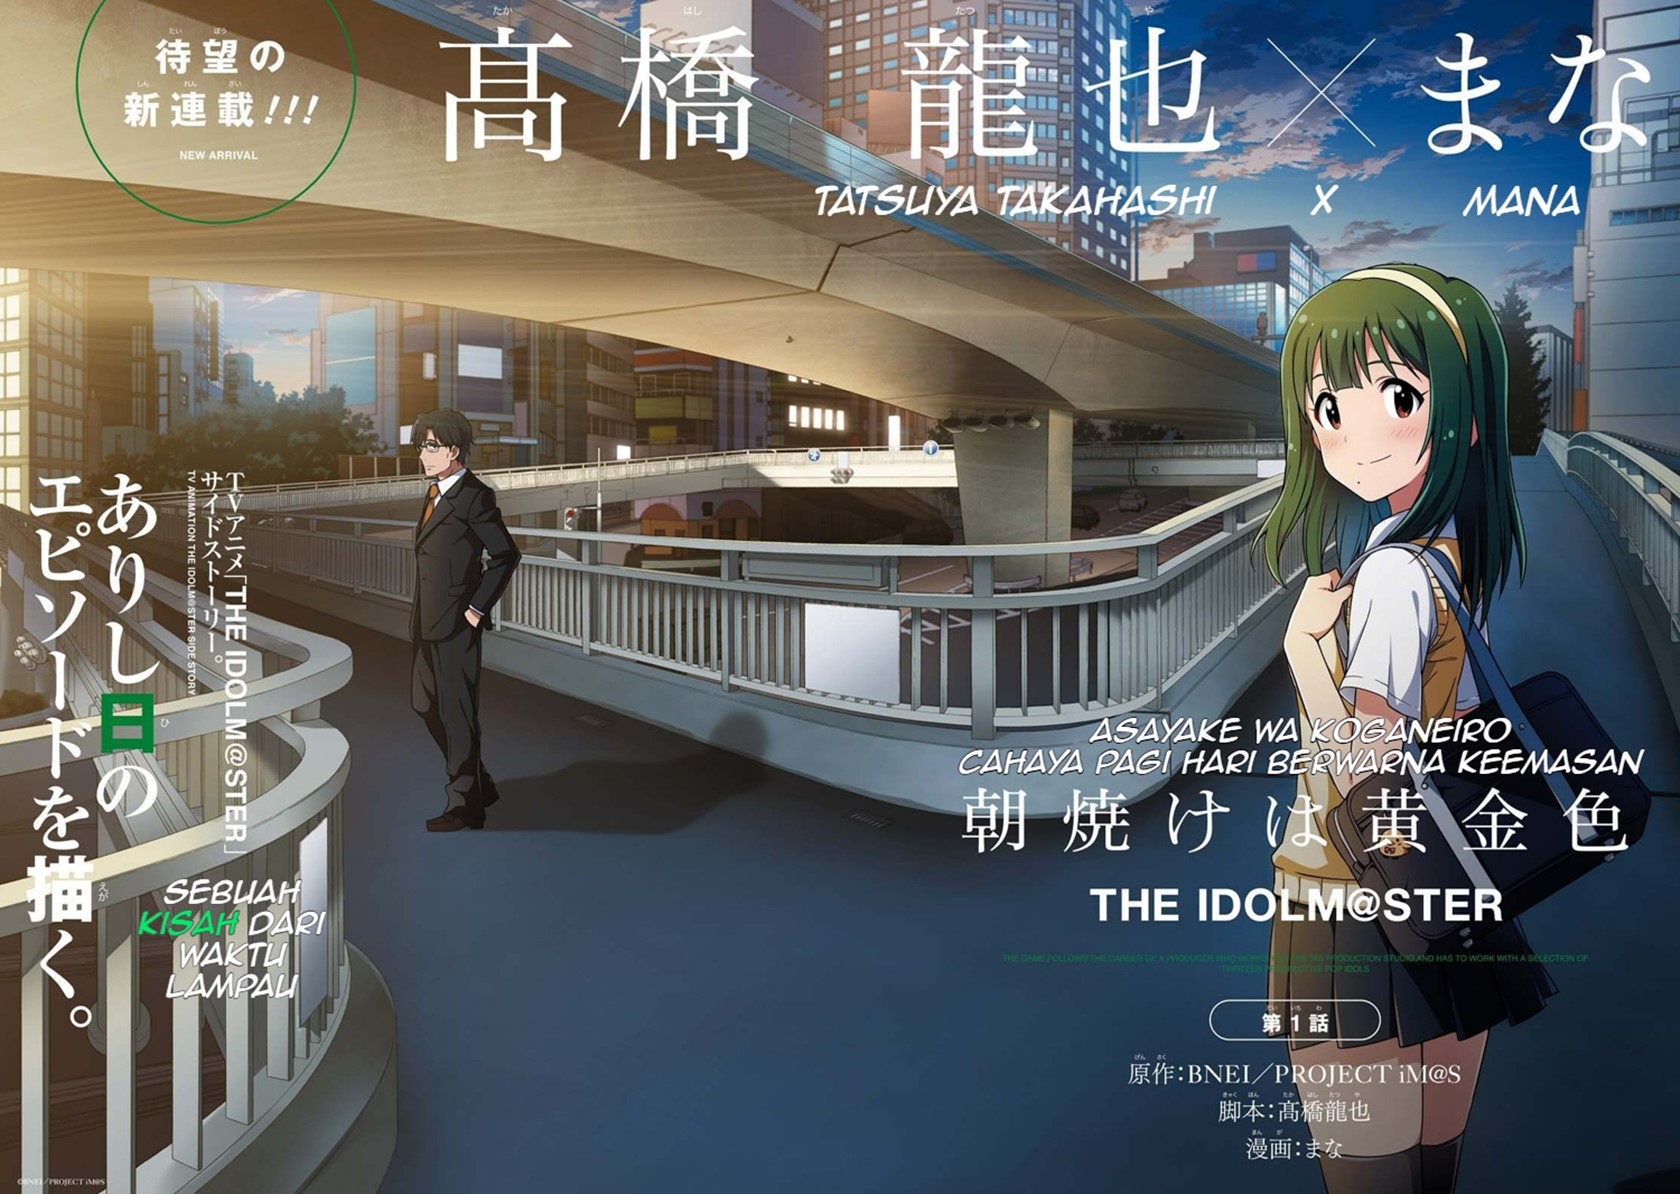 Morning Glow is Golden: The IDOLM@STER Chapter 1 Gambar 4